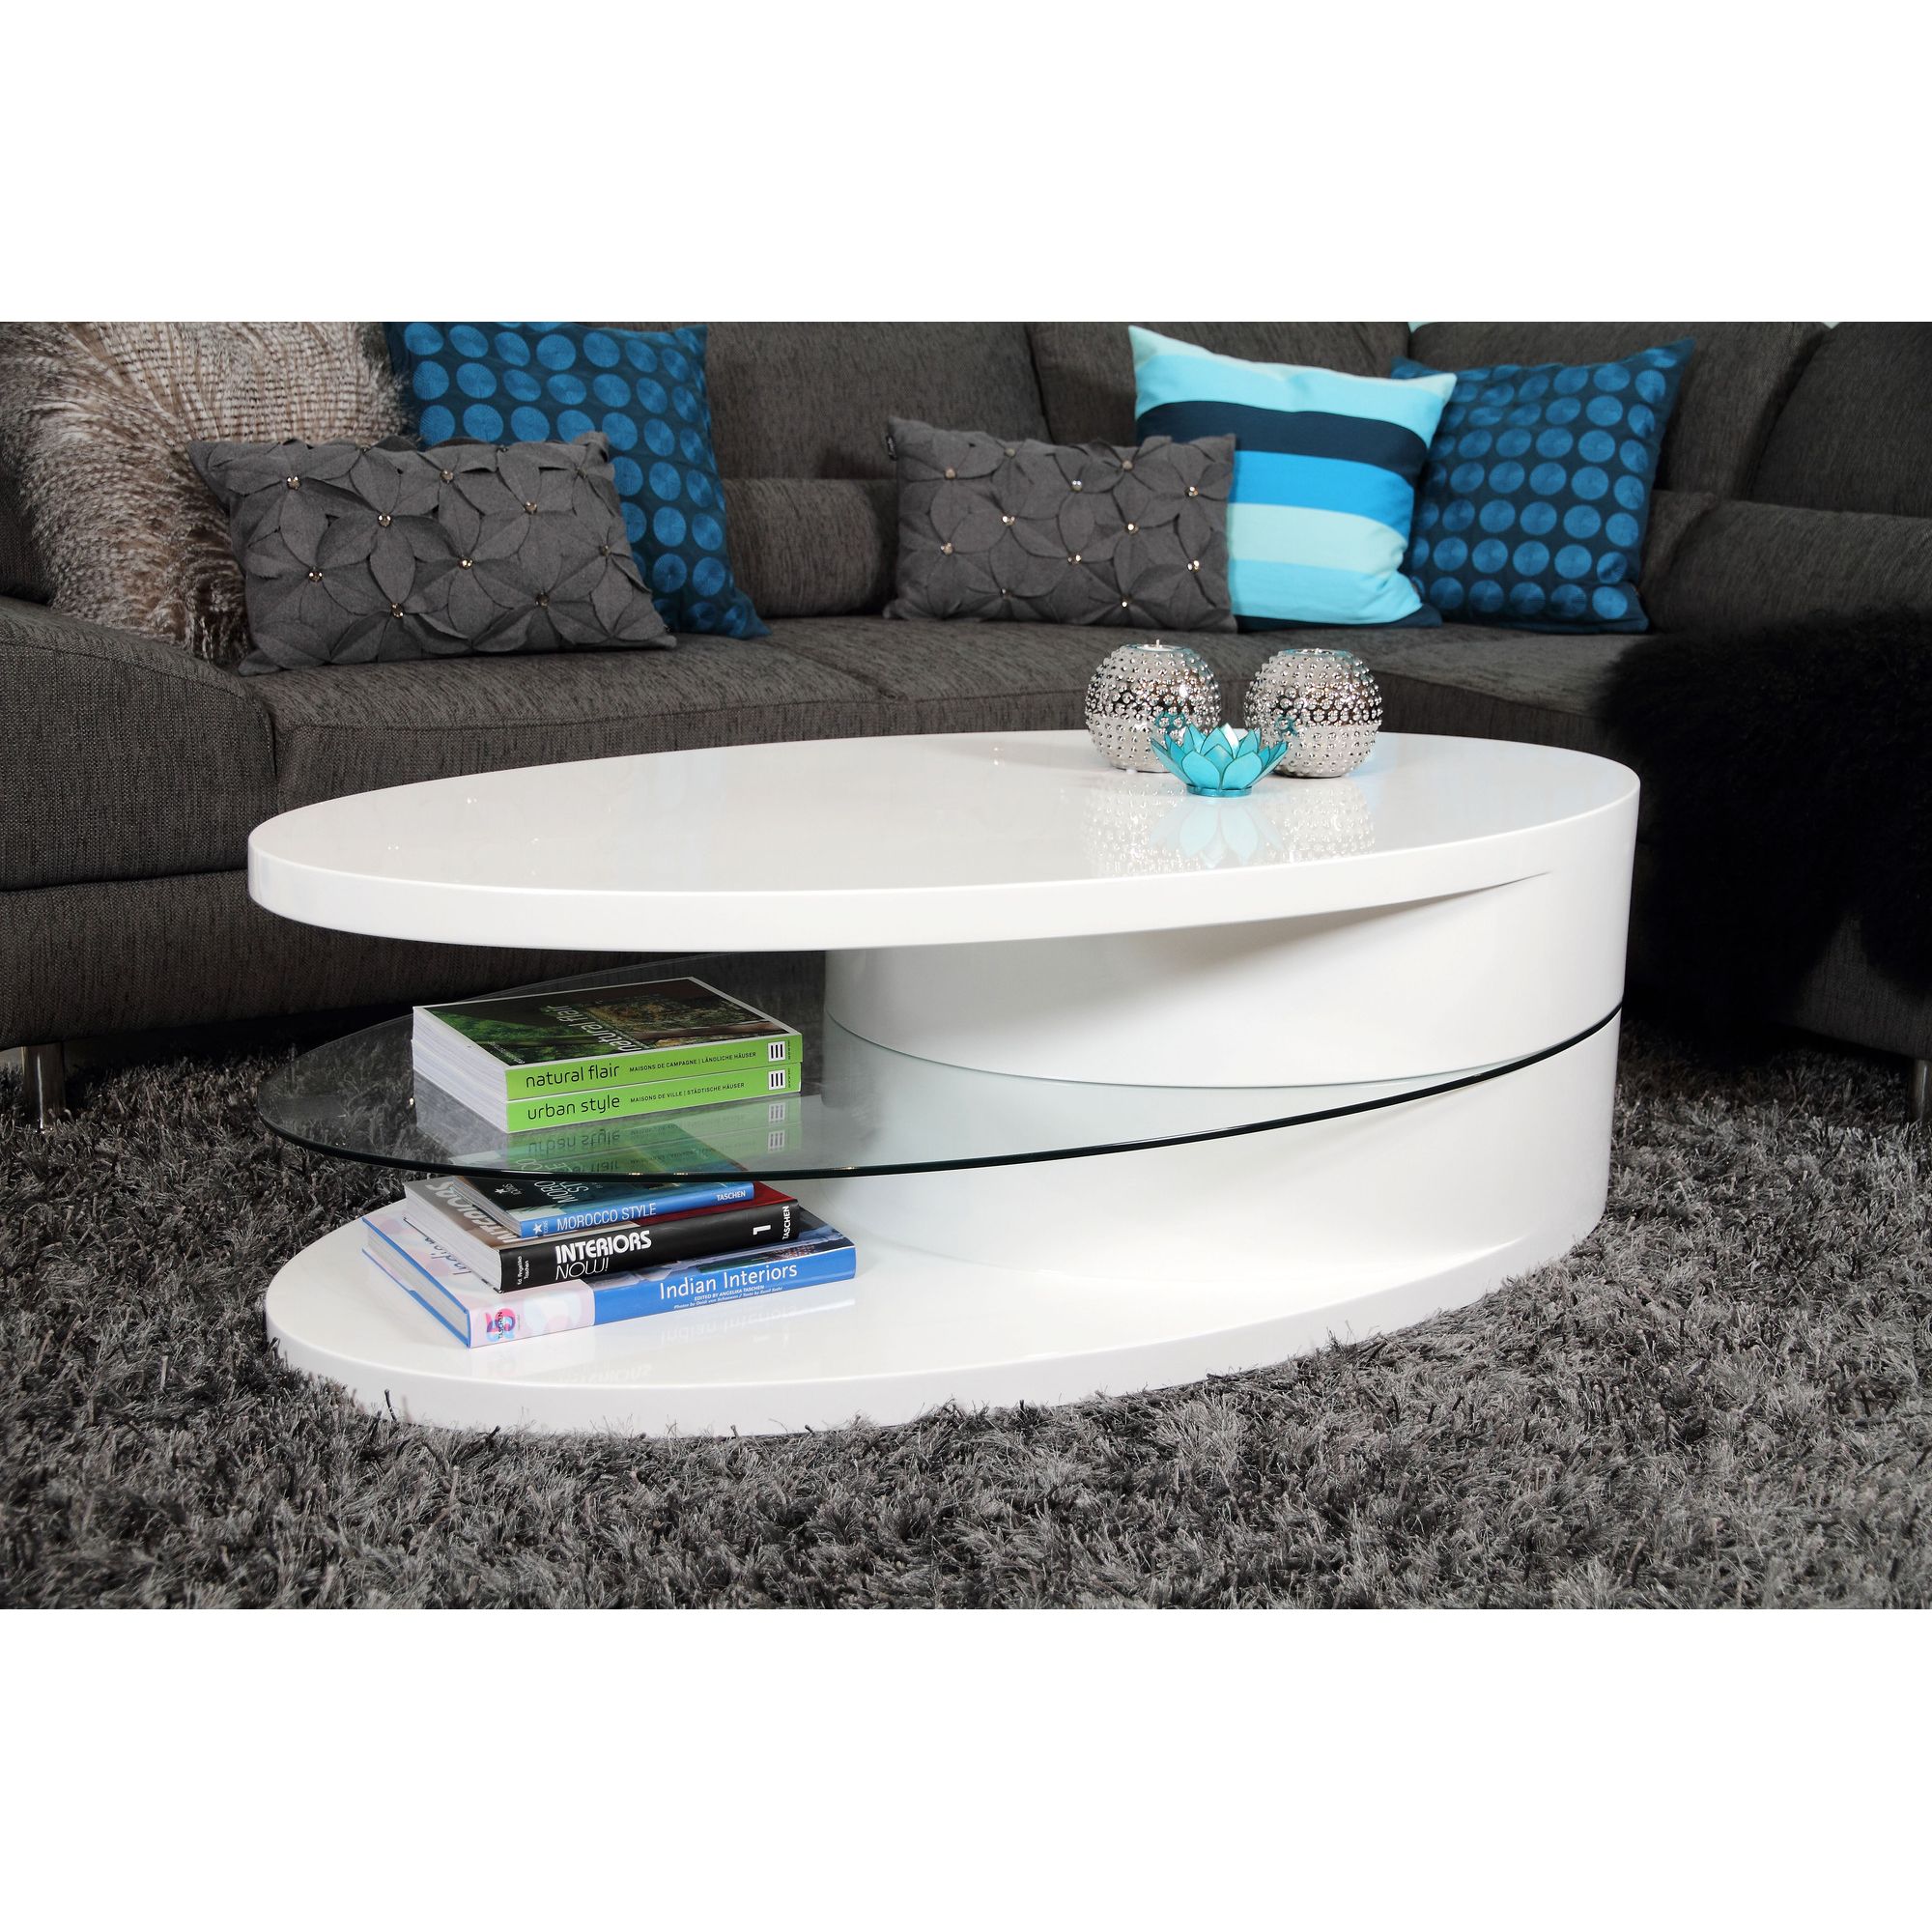 Aspect Design Shove Coffee Table in High Gloss White at Tescos Direct